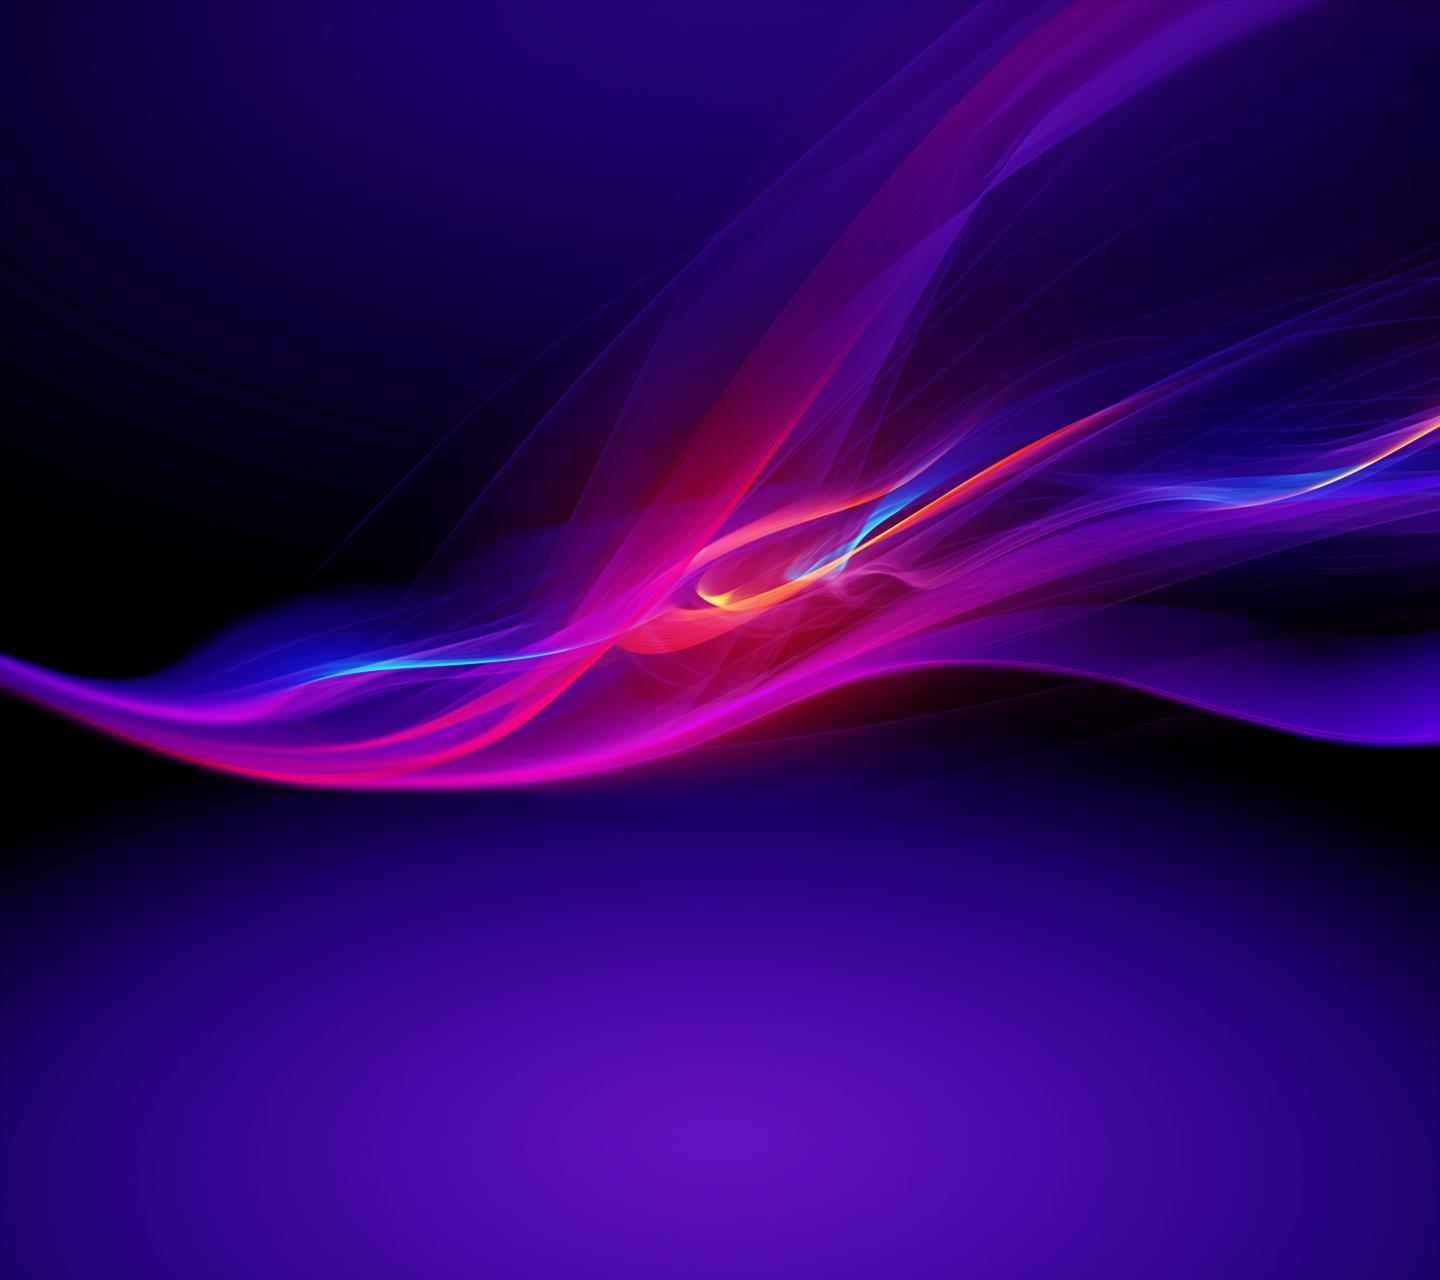 36+] Sony Xperia HD Wallpapers on